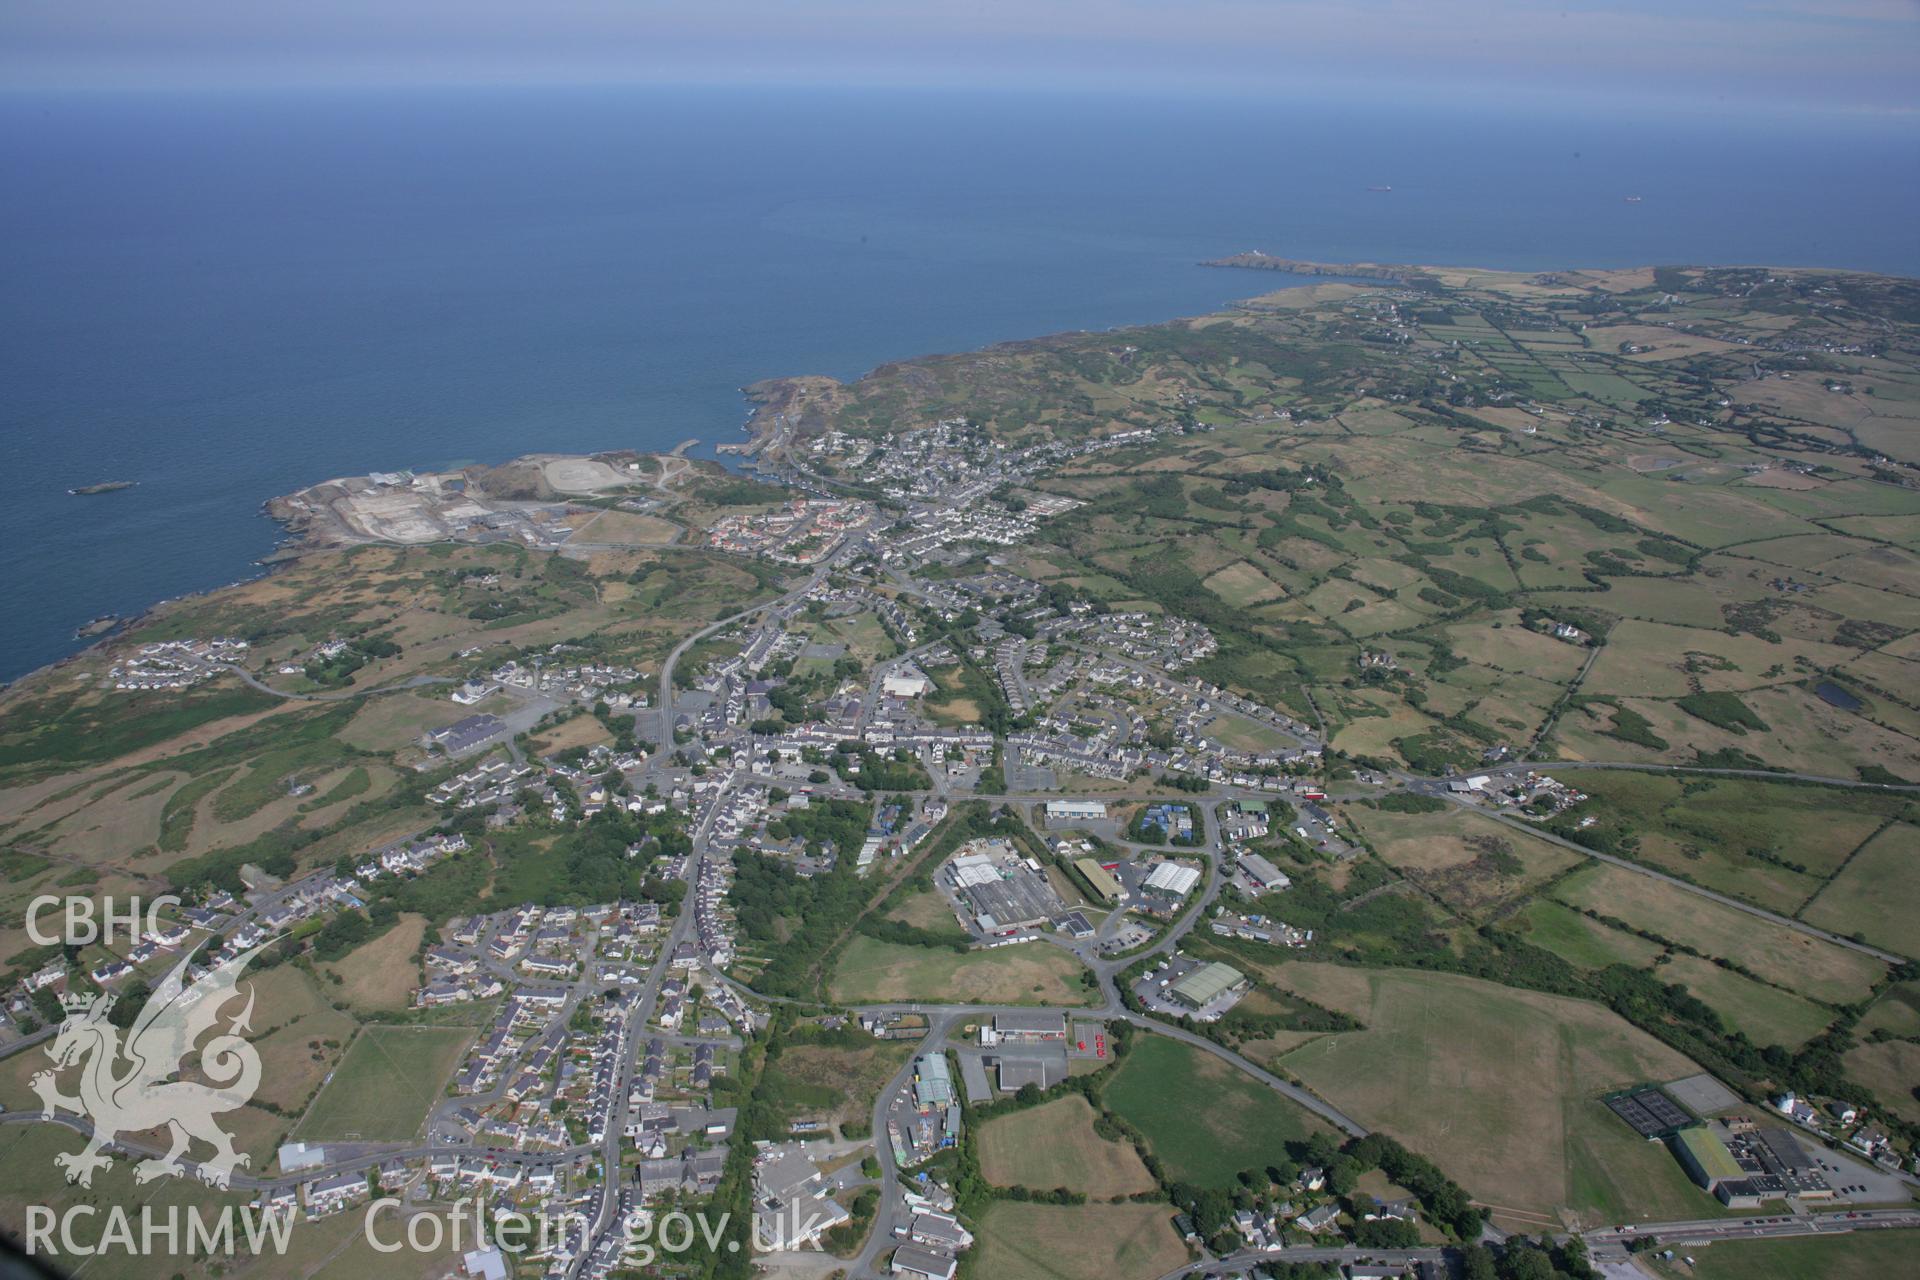 RCAHMW colour oblique aerial photograph of Porth Amlwch. Taken on 14 August 2006 by Toby Driver.